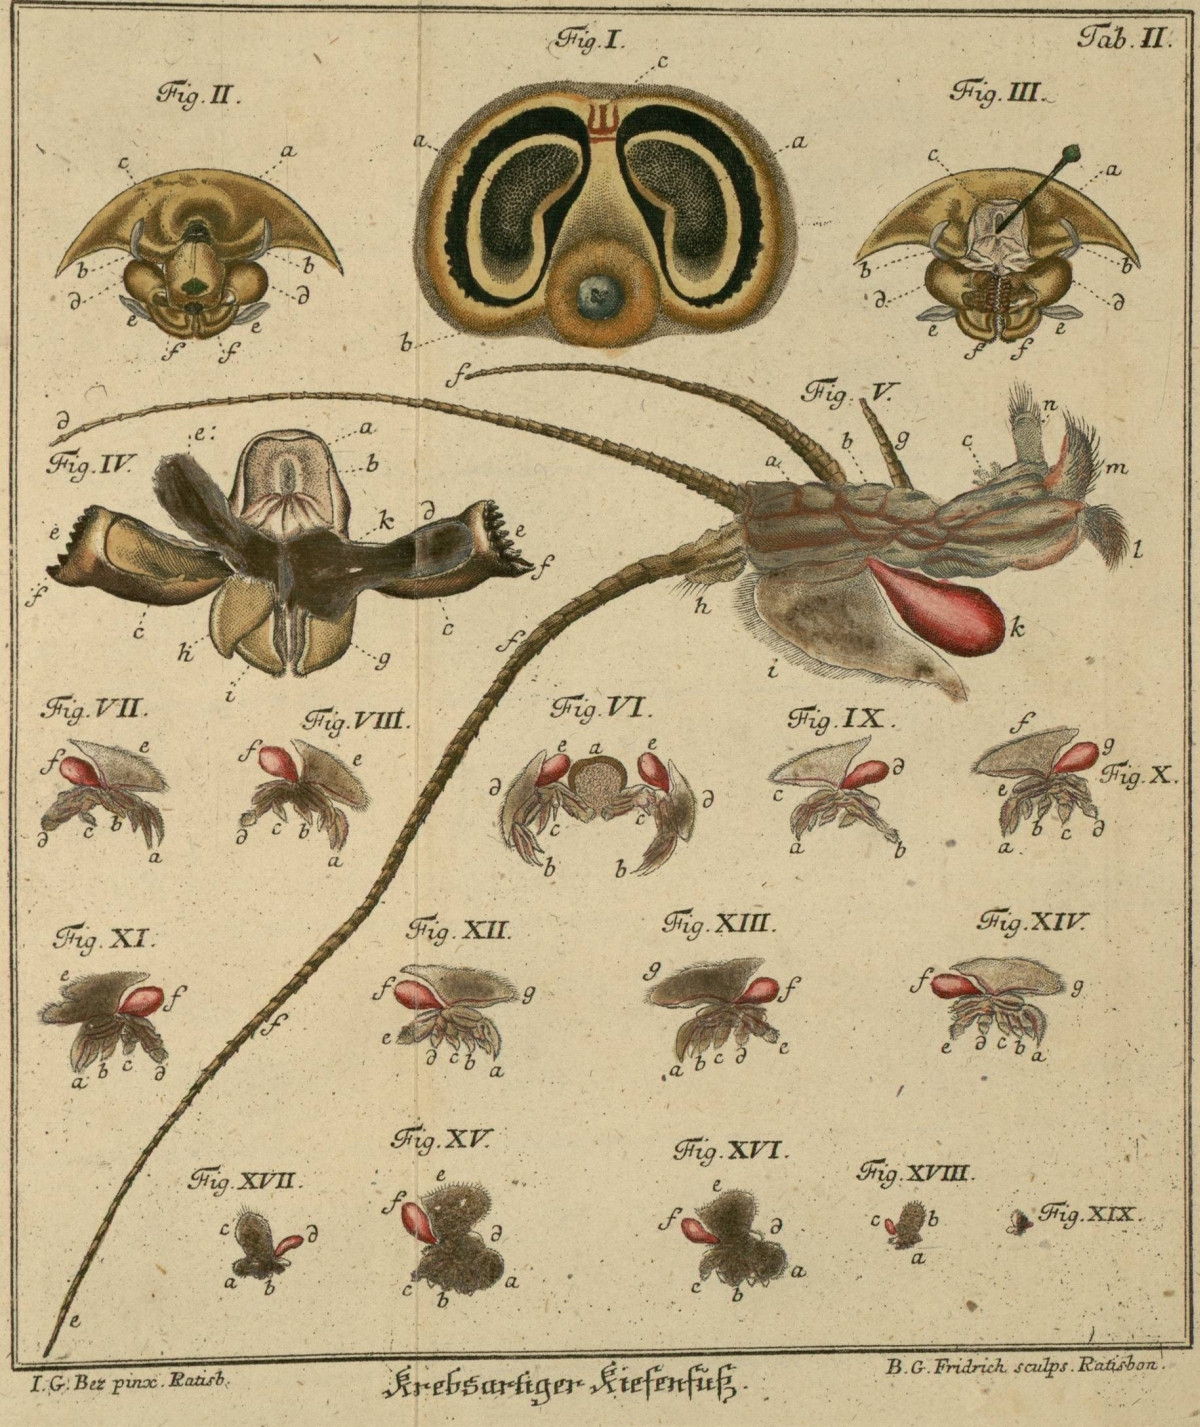 engraving of insects